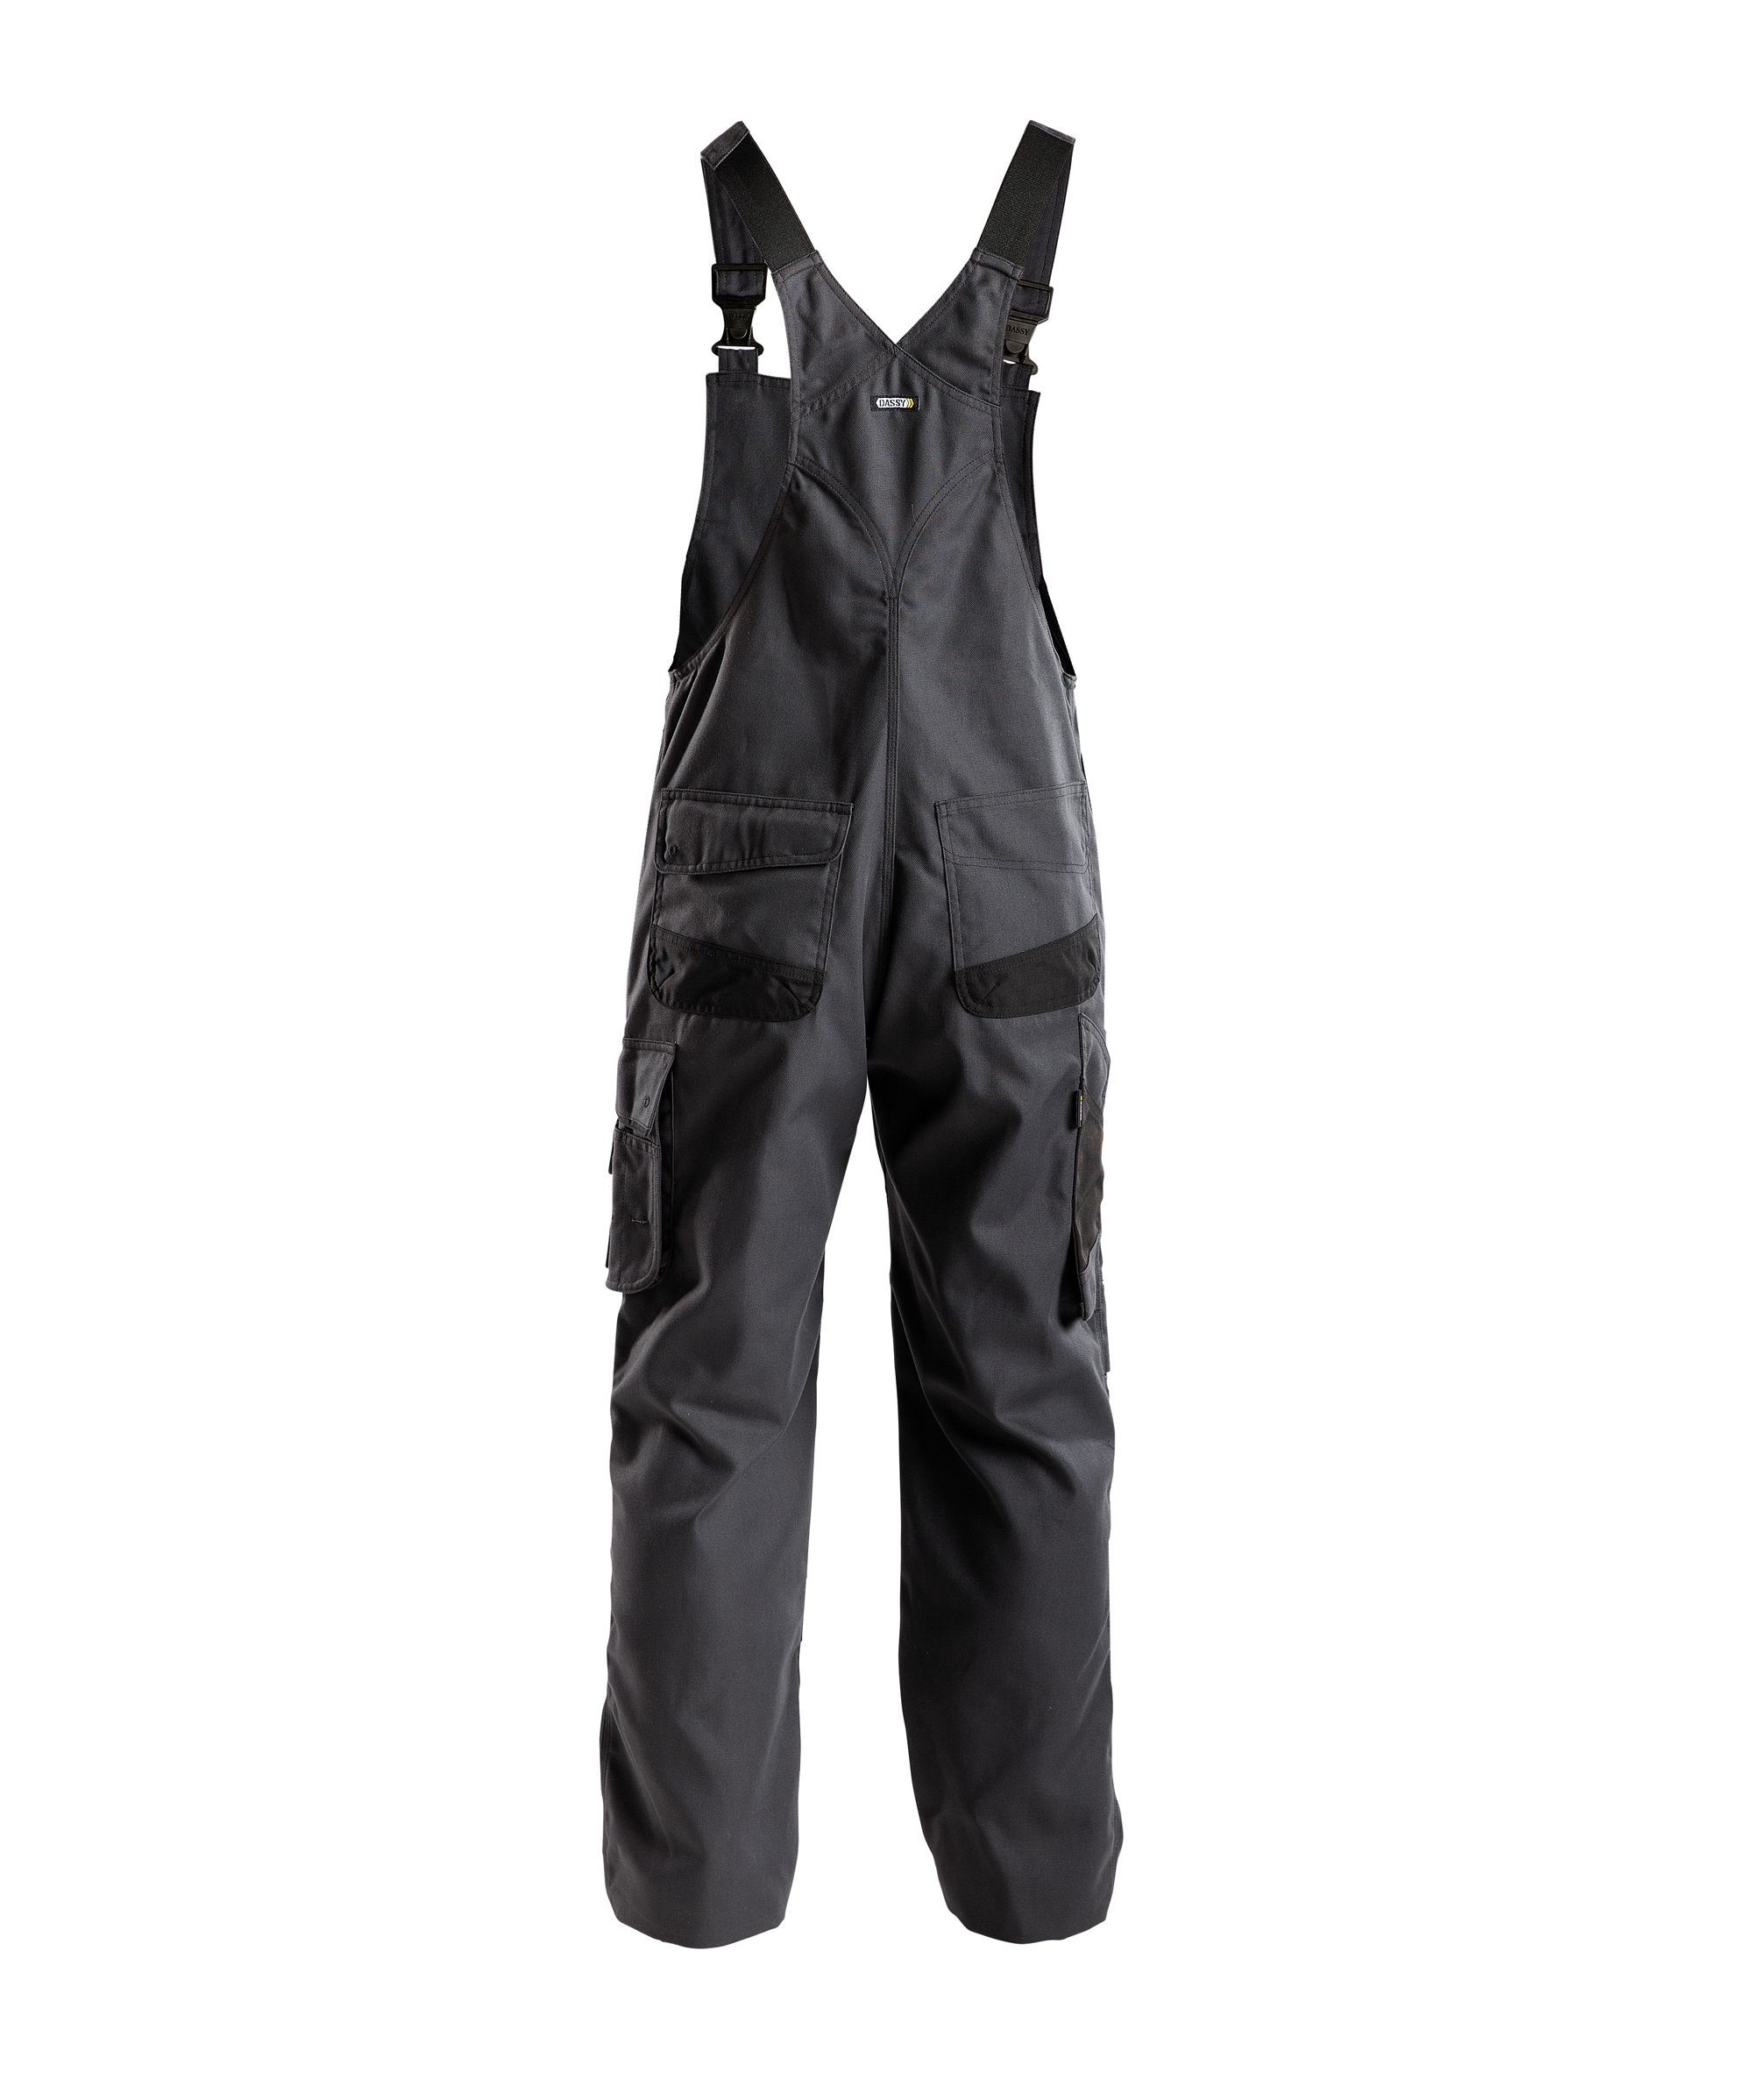 bolt_canvas-brace-overall-with-knee-pockets_anthracite-grey-black_back.jpg